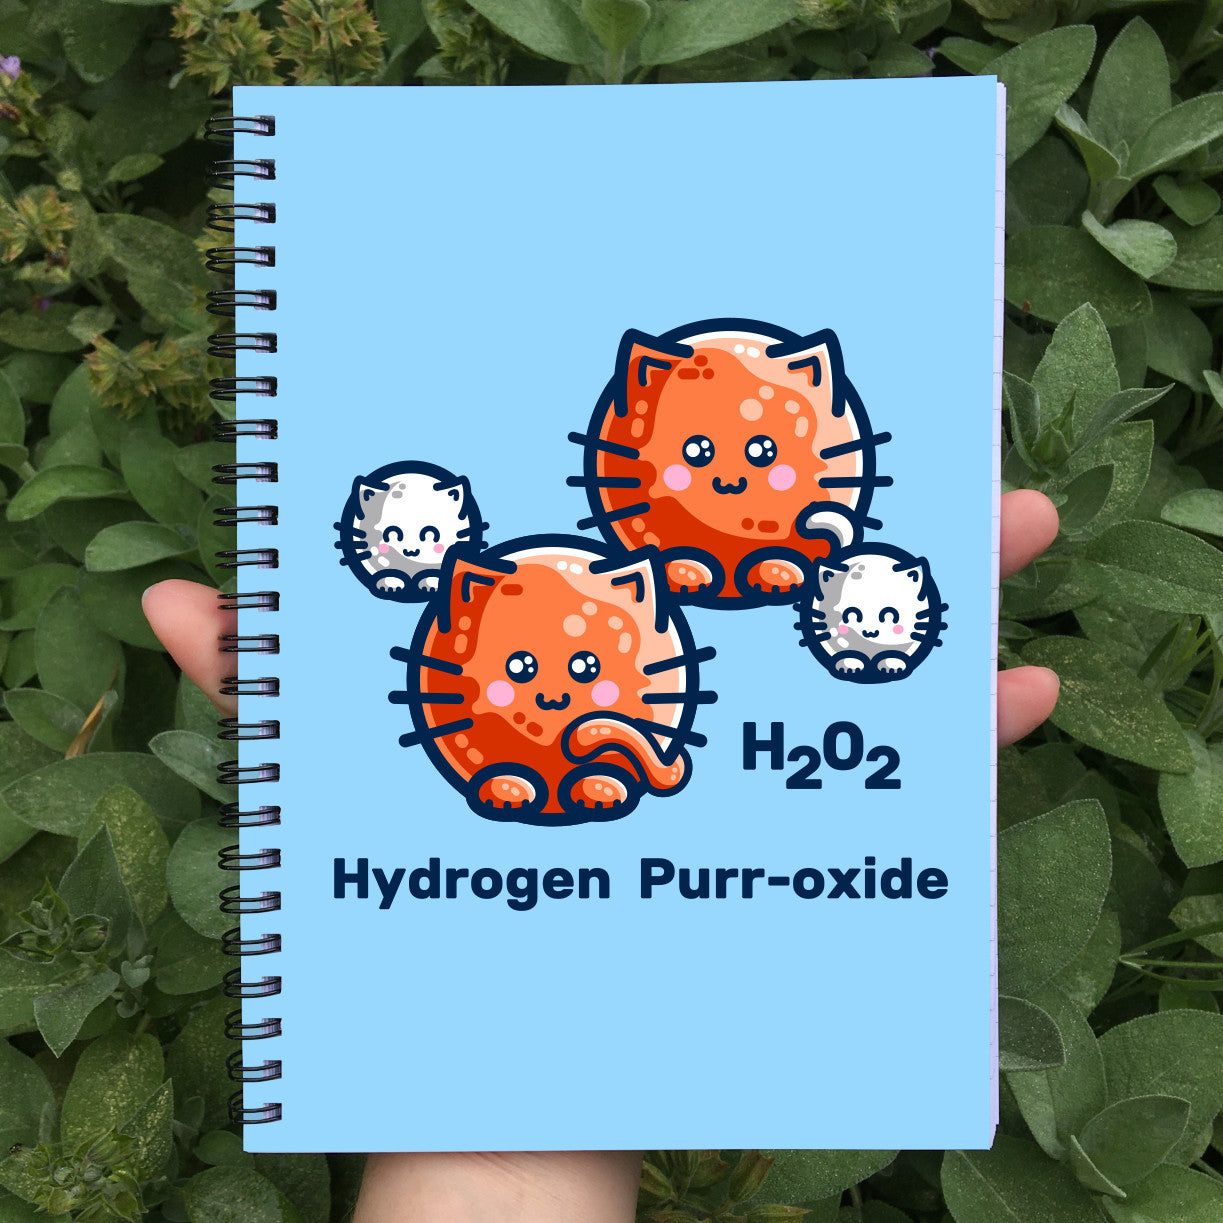 A blue spiral notebook being held in a hand with a design on the front cover of four cats representing the atoms in a hydrgen peroxide molecule with the words H202 hydrogen purr-oxide